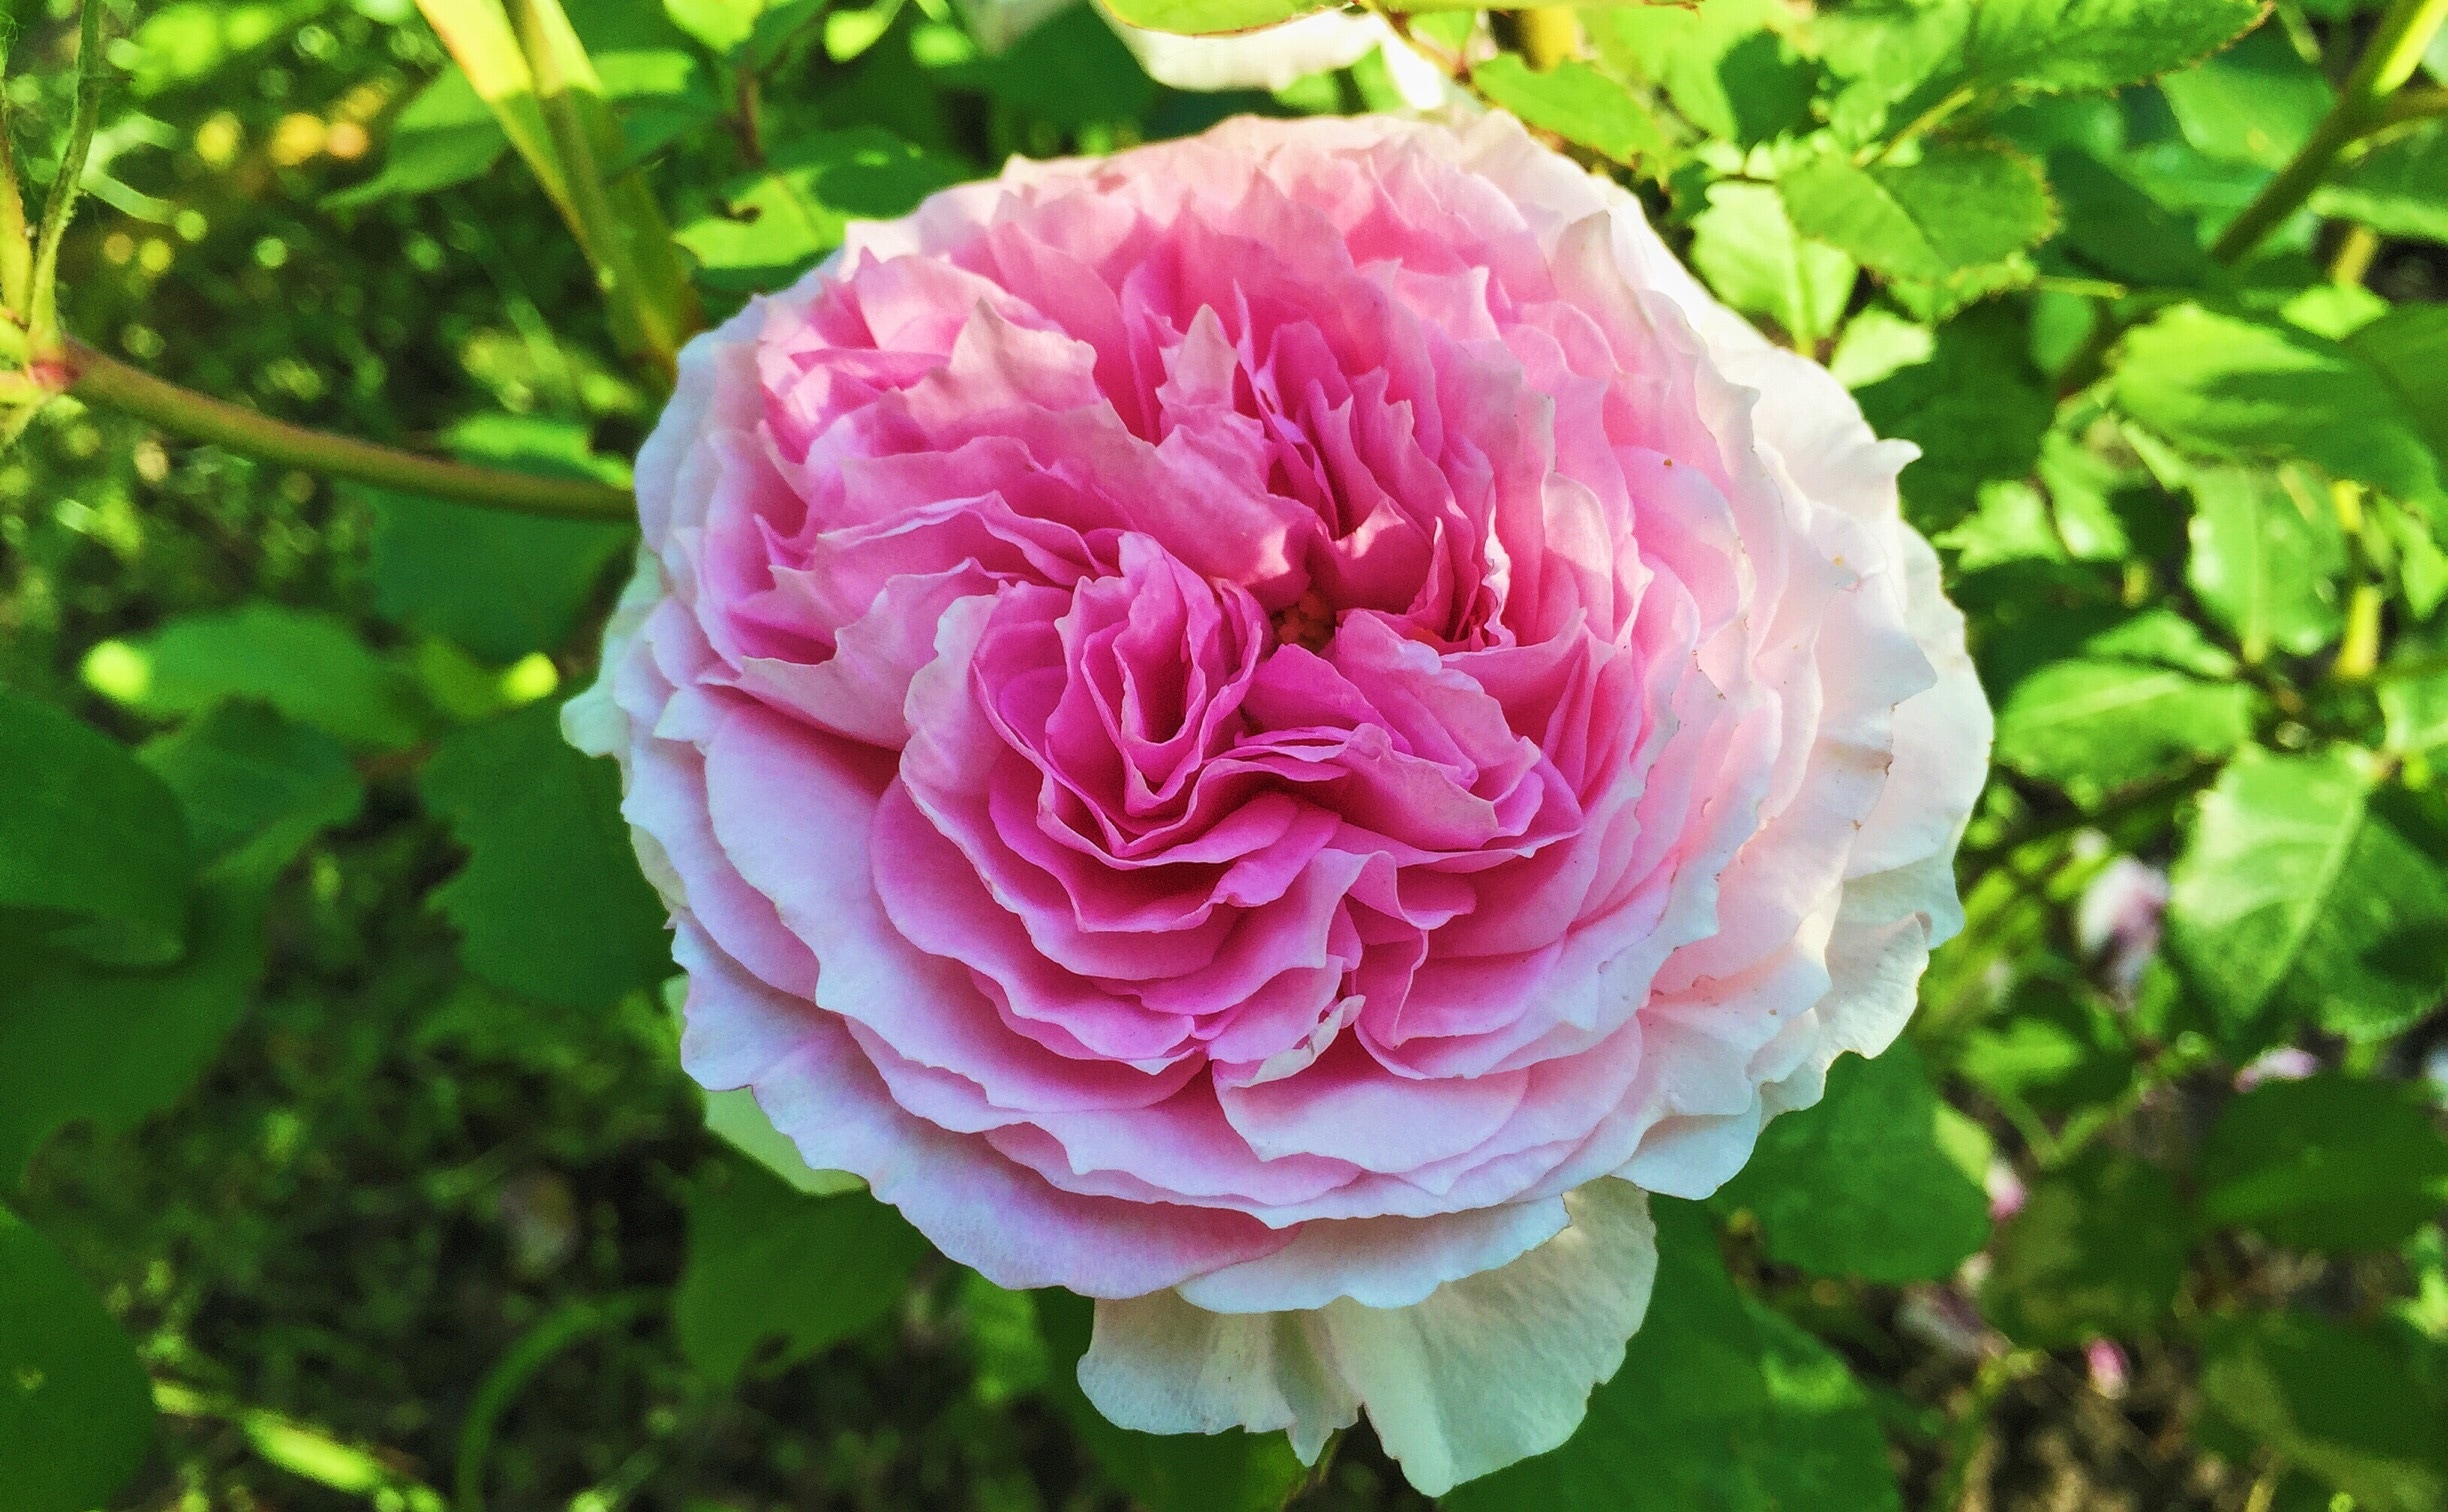 photography of pink rose during daytime